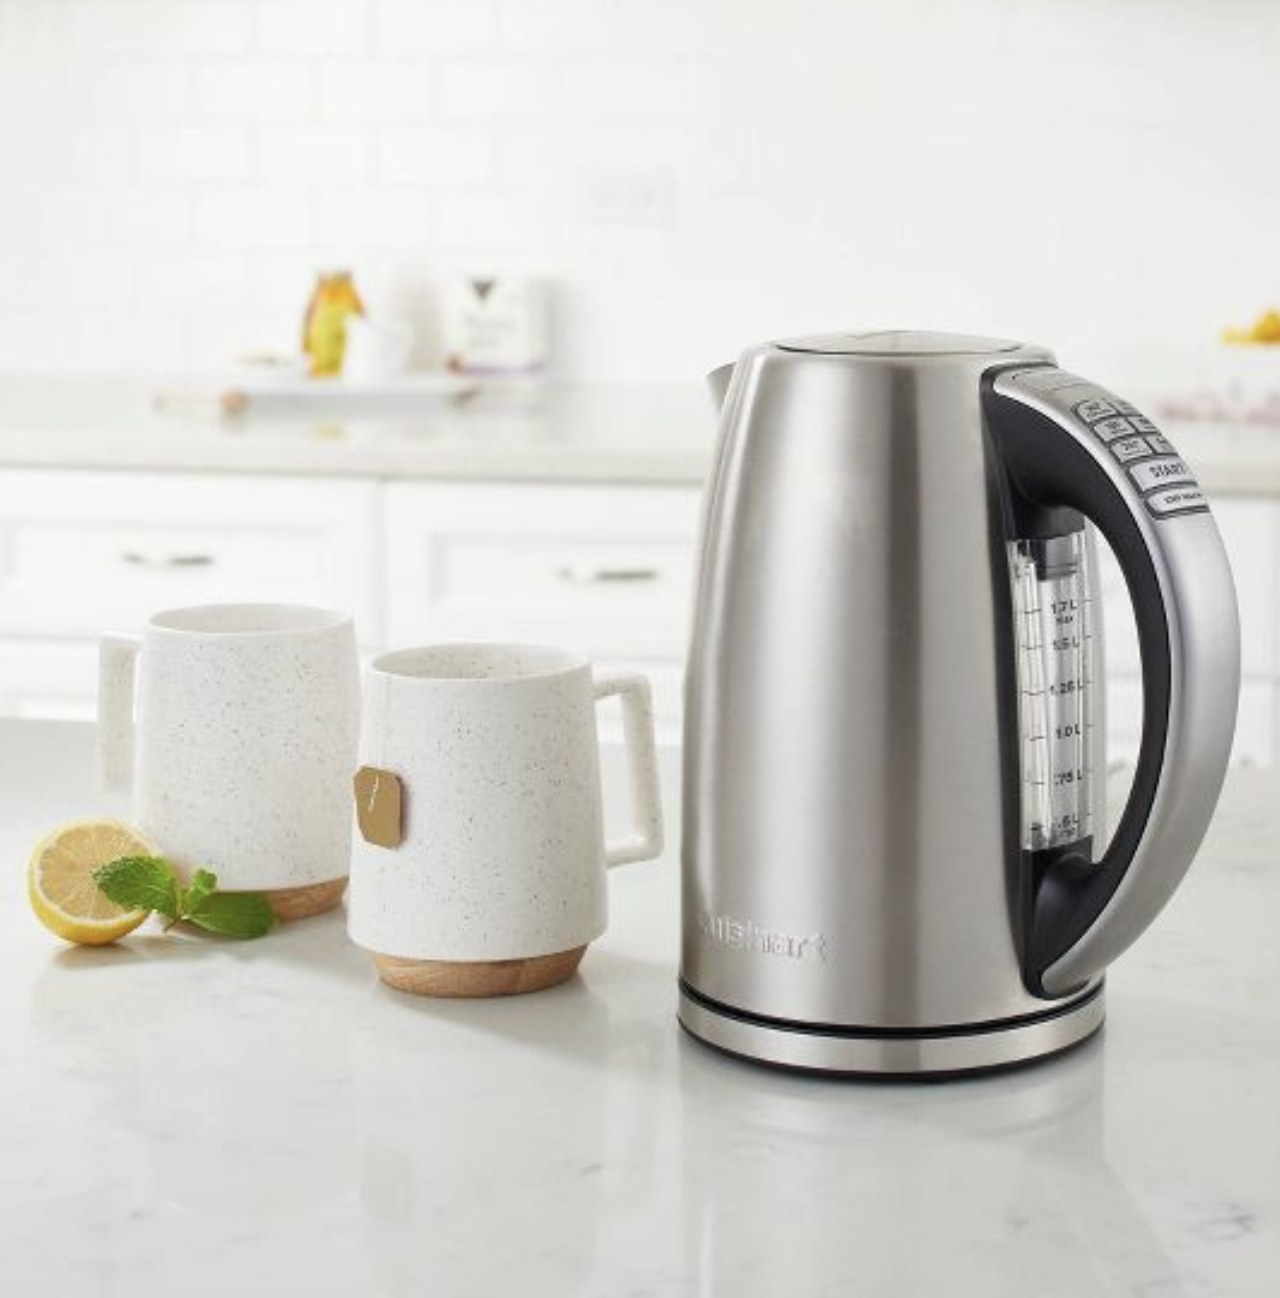 programmable kettle on a countertop next to two mugs